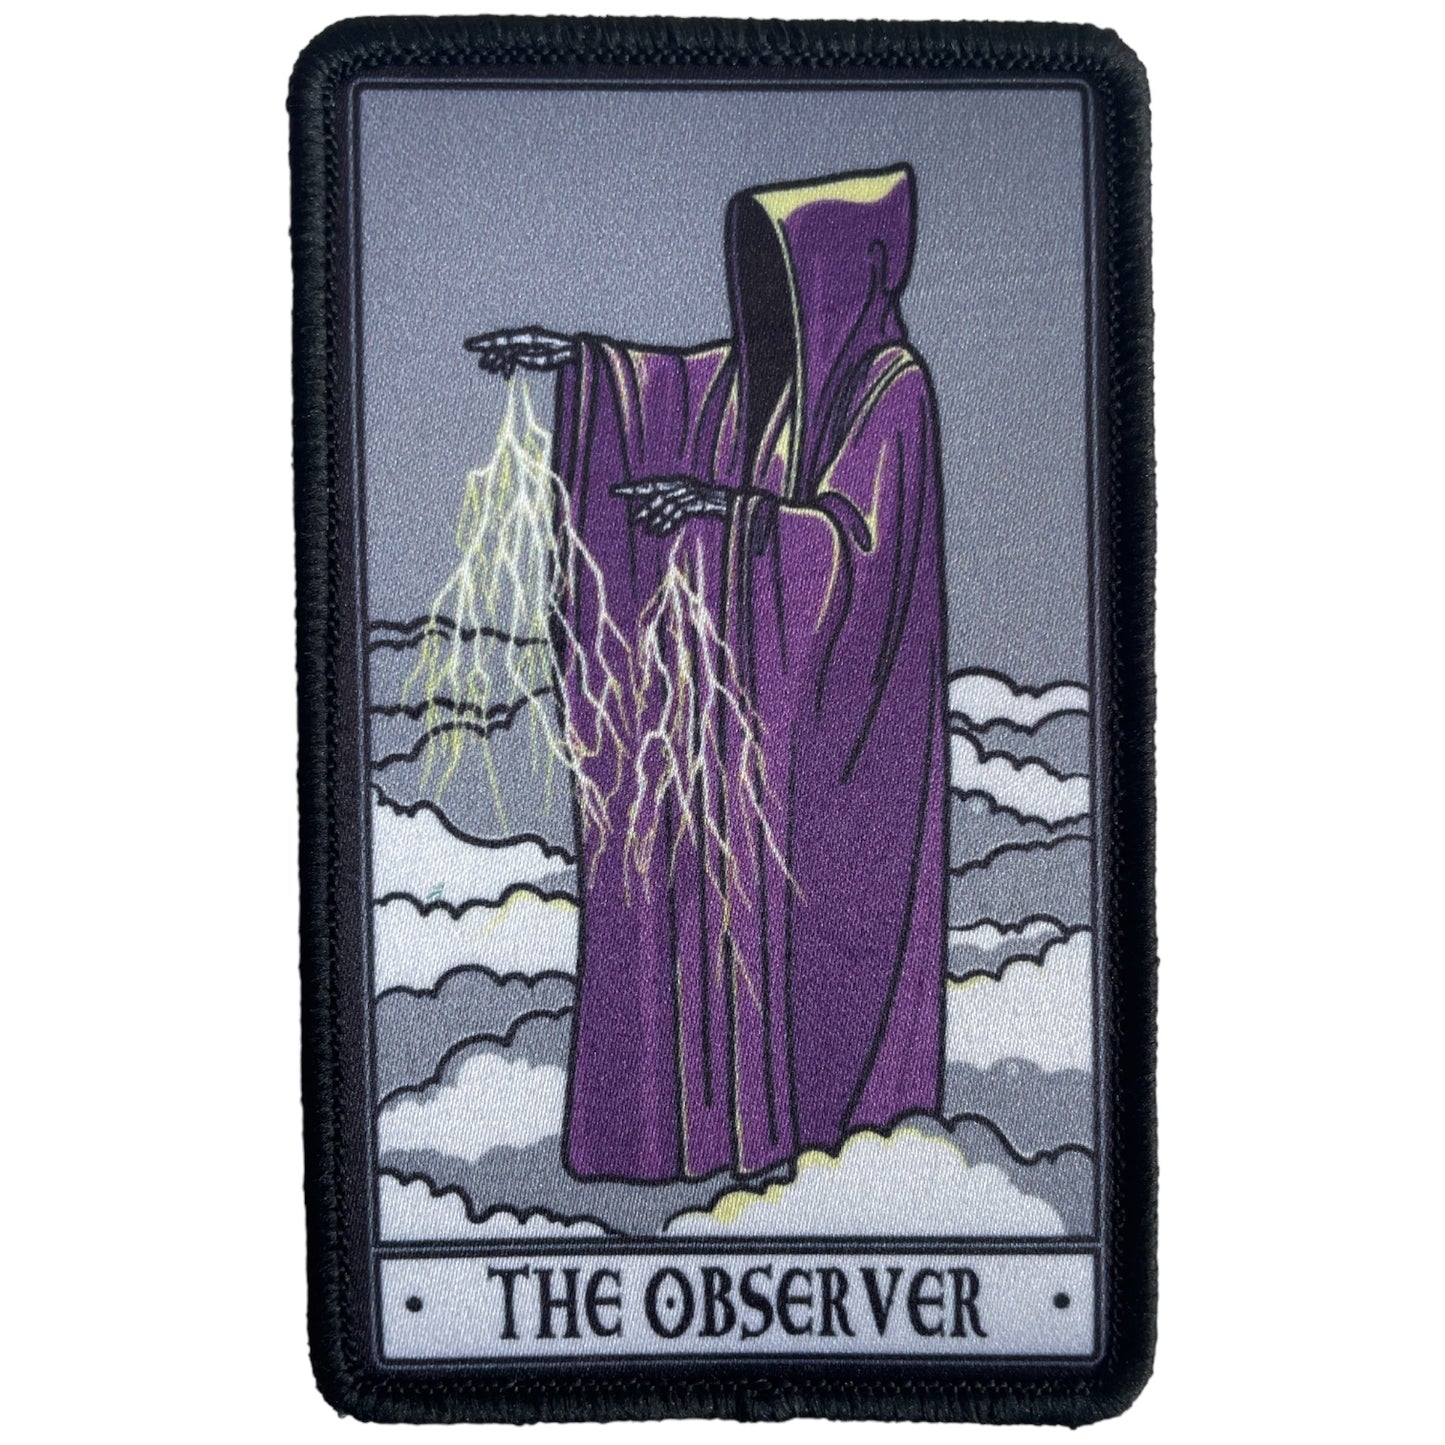 The Observer Patch